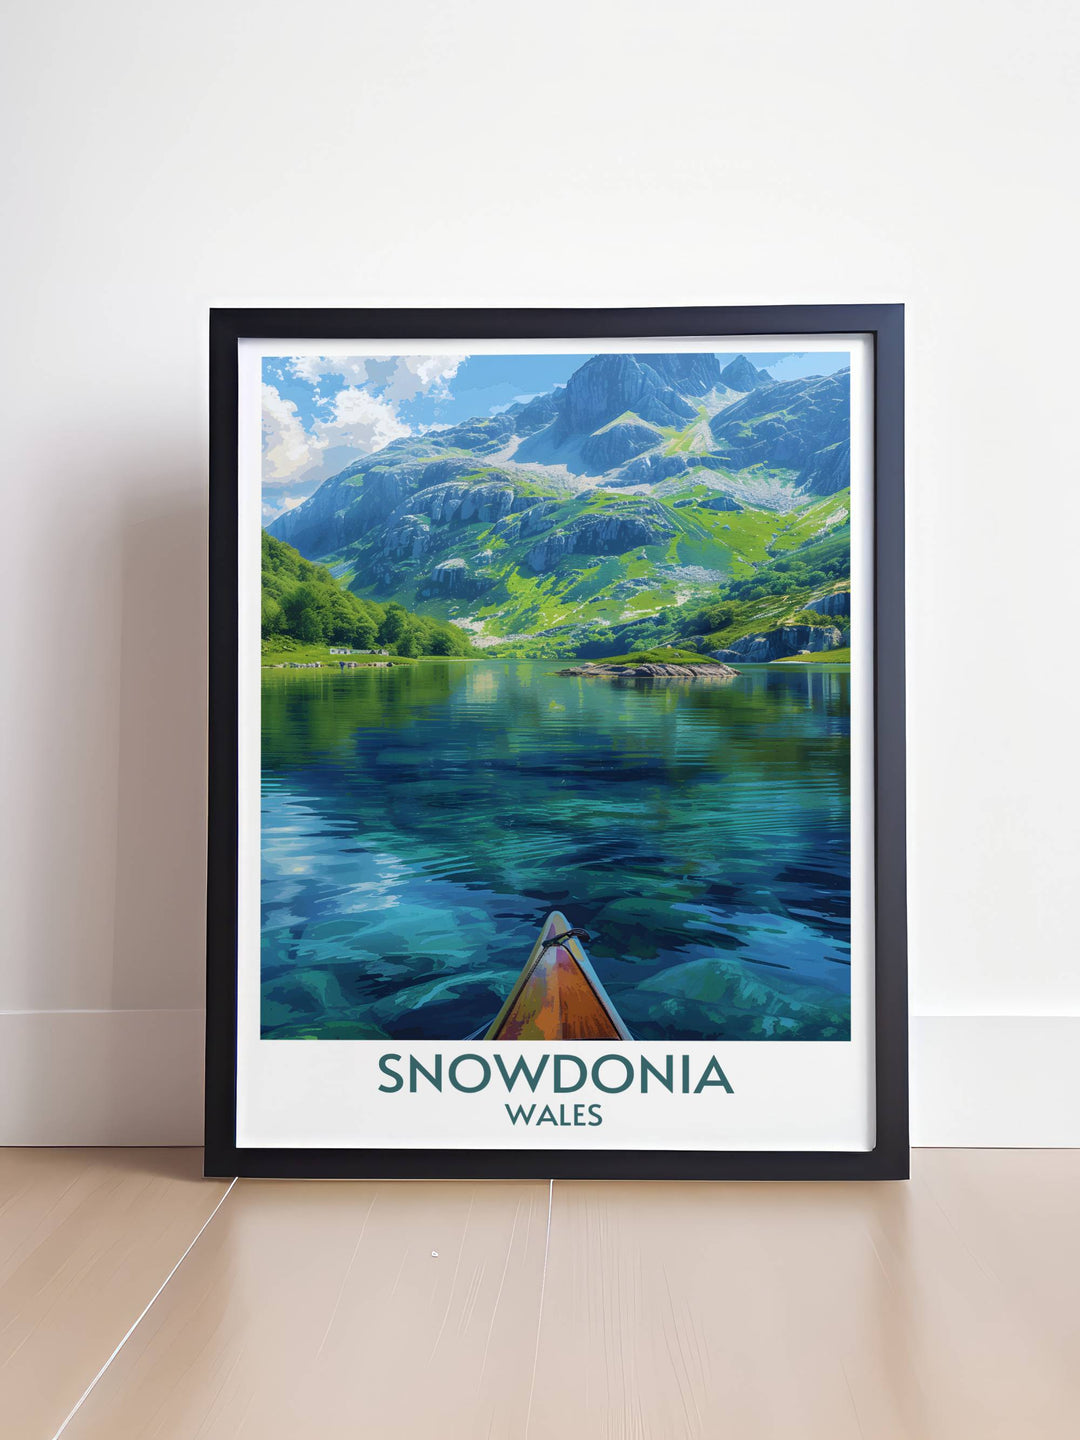 Experience the peace and tranquility of Snowdonia with our Llyn Padarn Wall Art. This stunning print showcases the glacially formed lake nestled in the heart of Snowdonia National Park, ideal for creating a calming atmosphere in your living space.